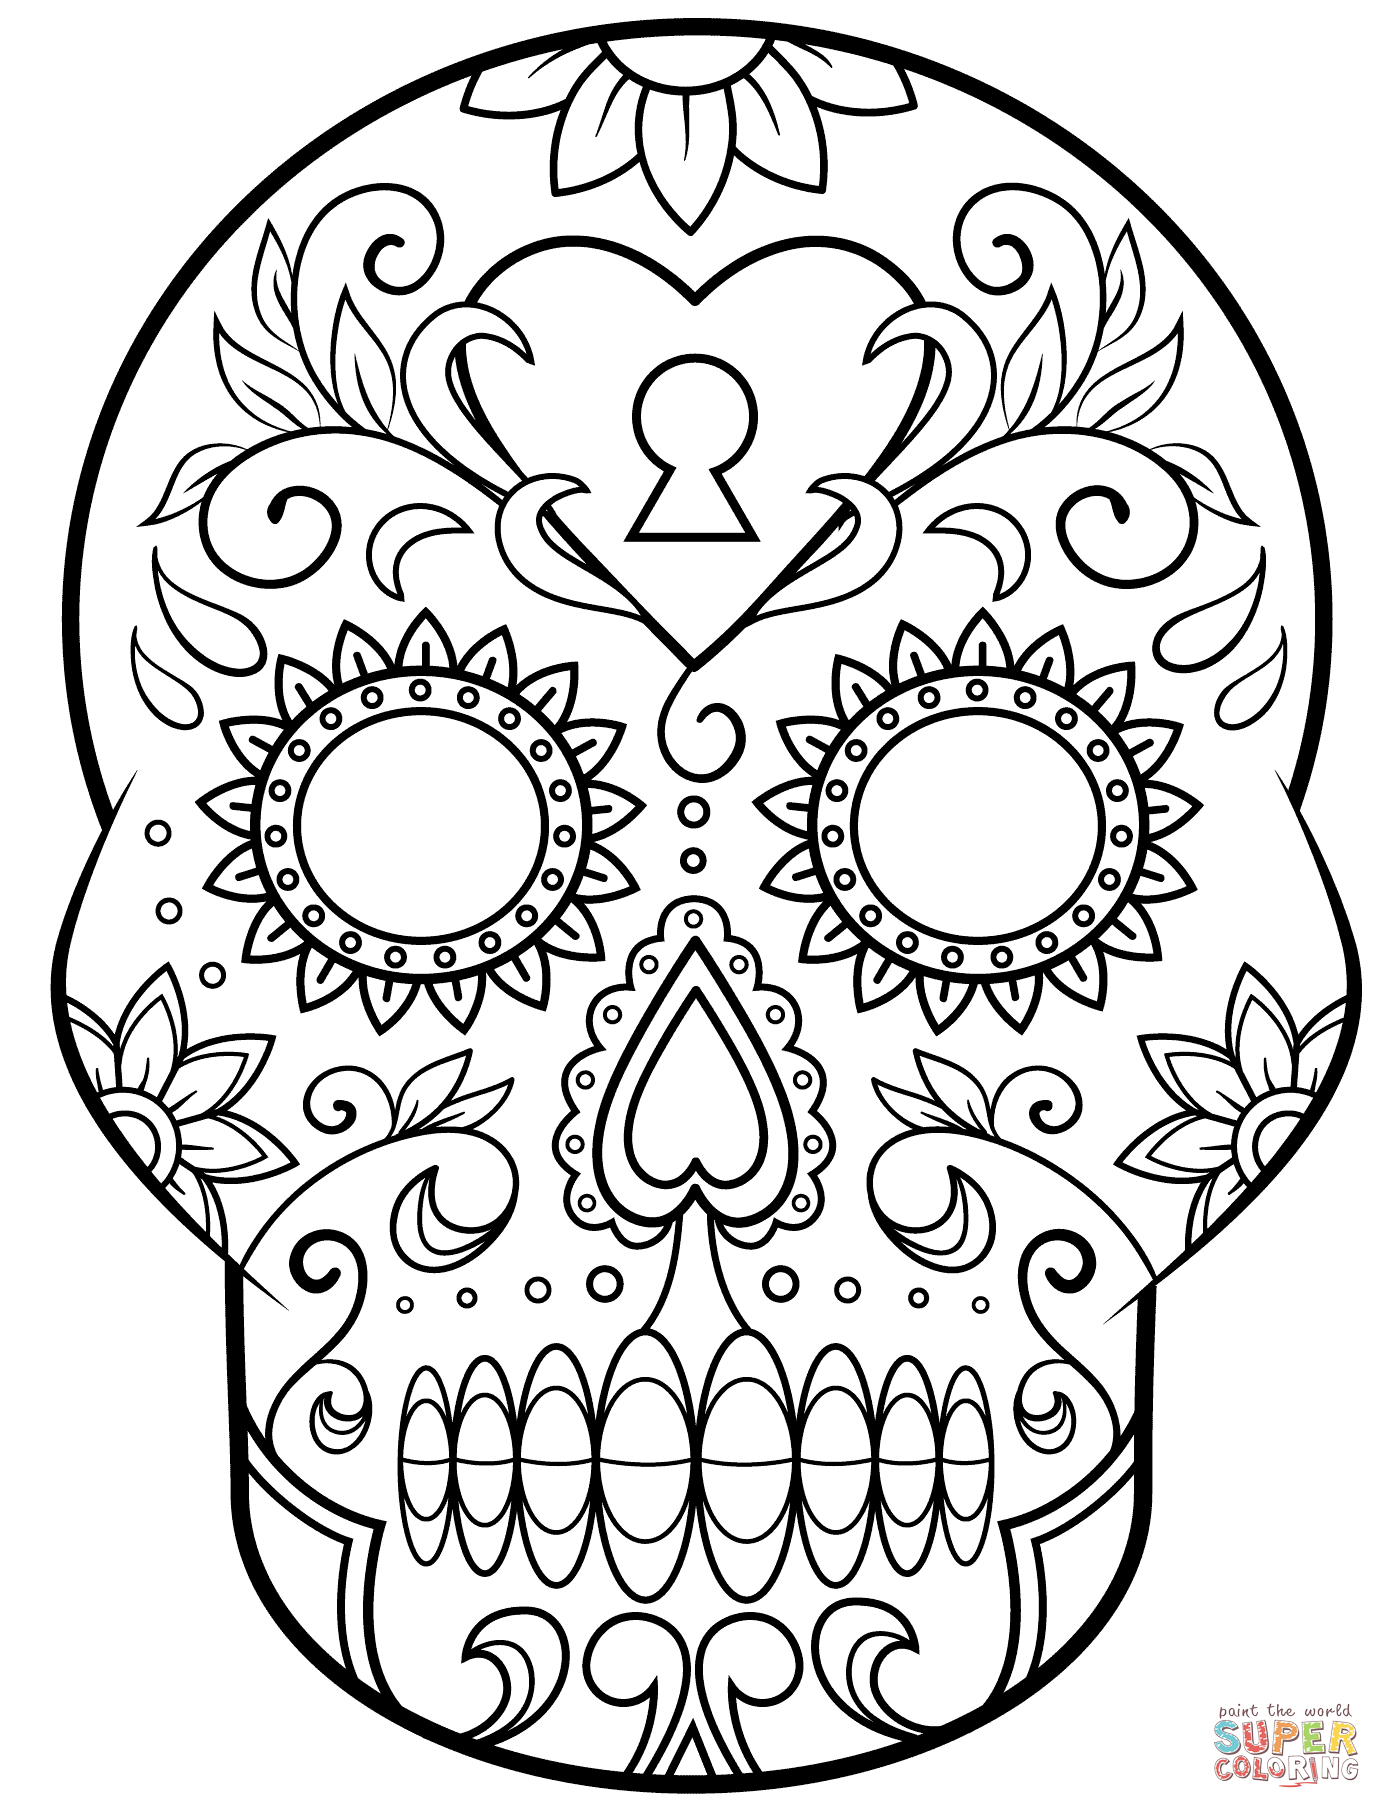 Amazing Sugar Skull Pictures & Backgrounds